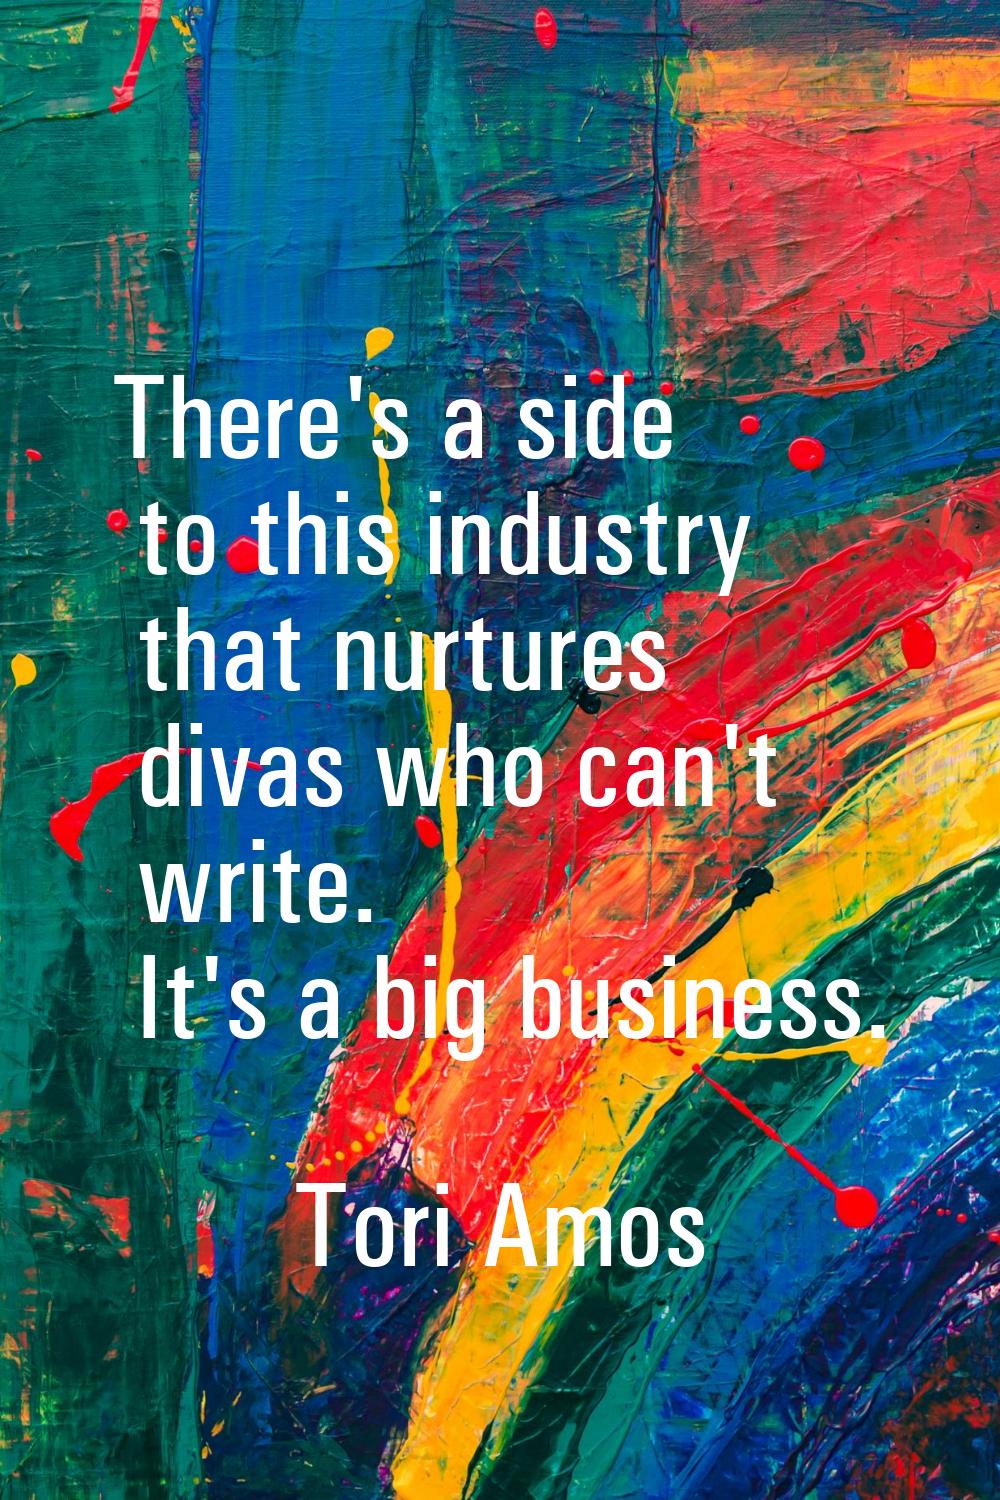 There's a side to this industry that nurtures divas who can't write. It's a big business.